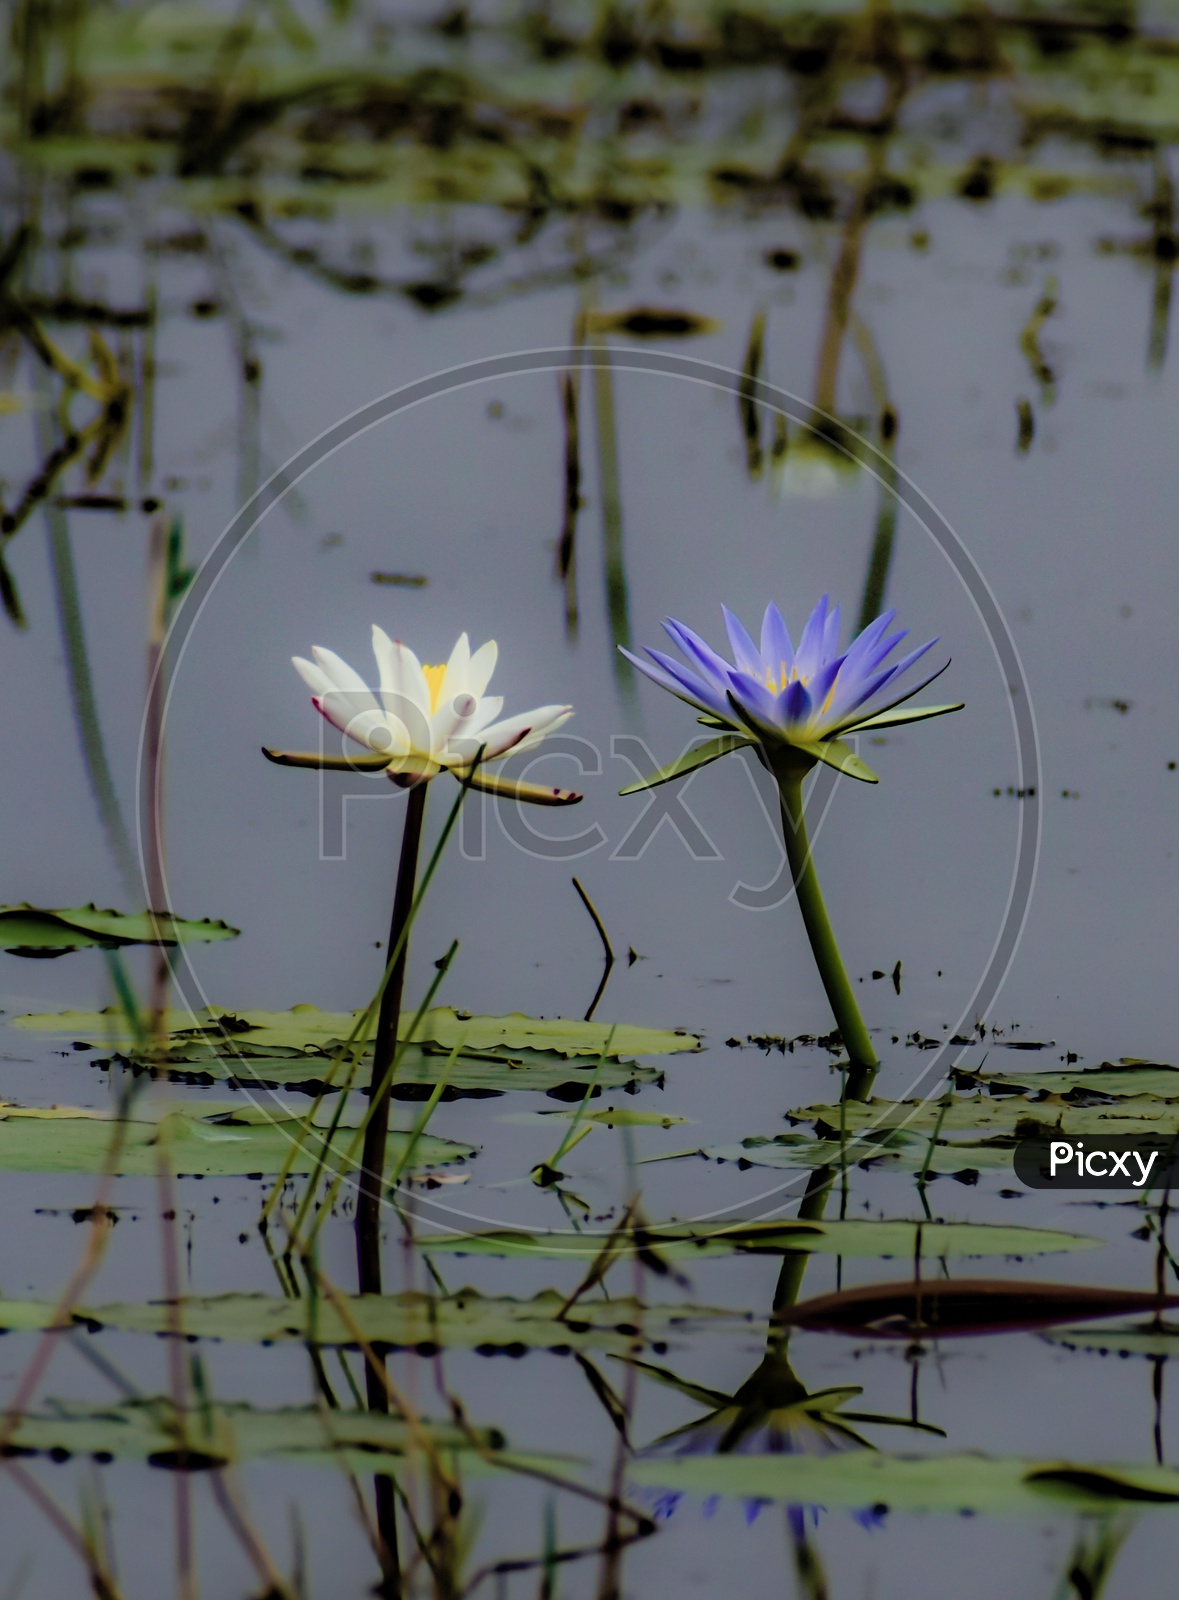 The white and blue lotus